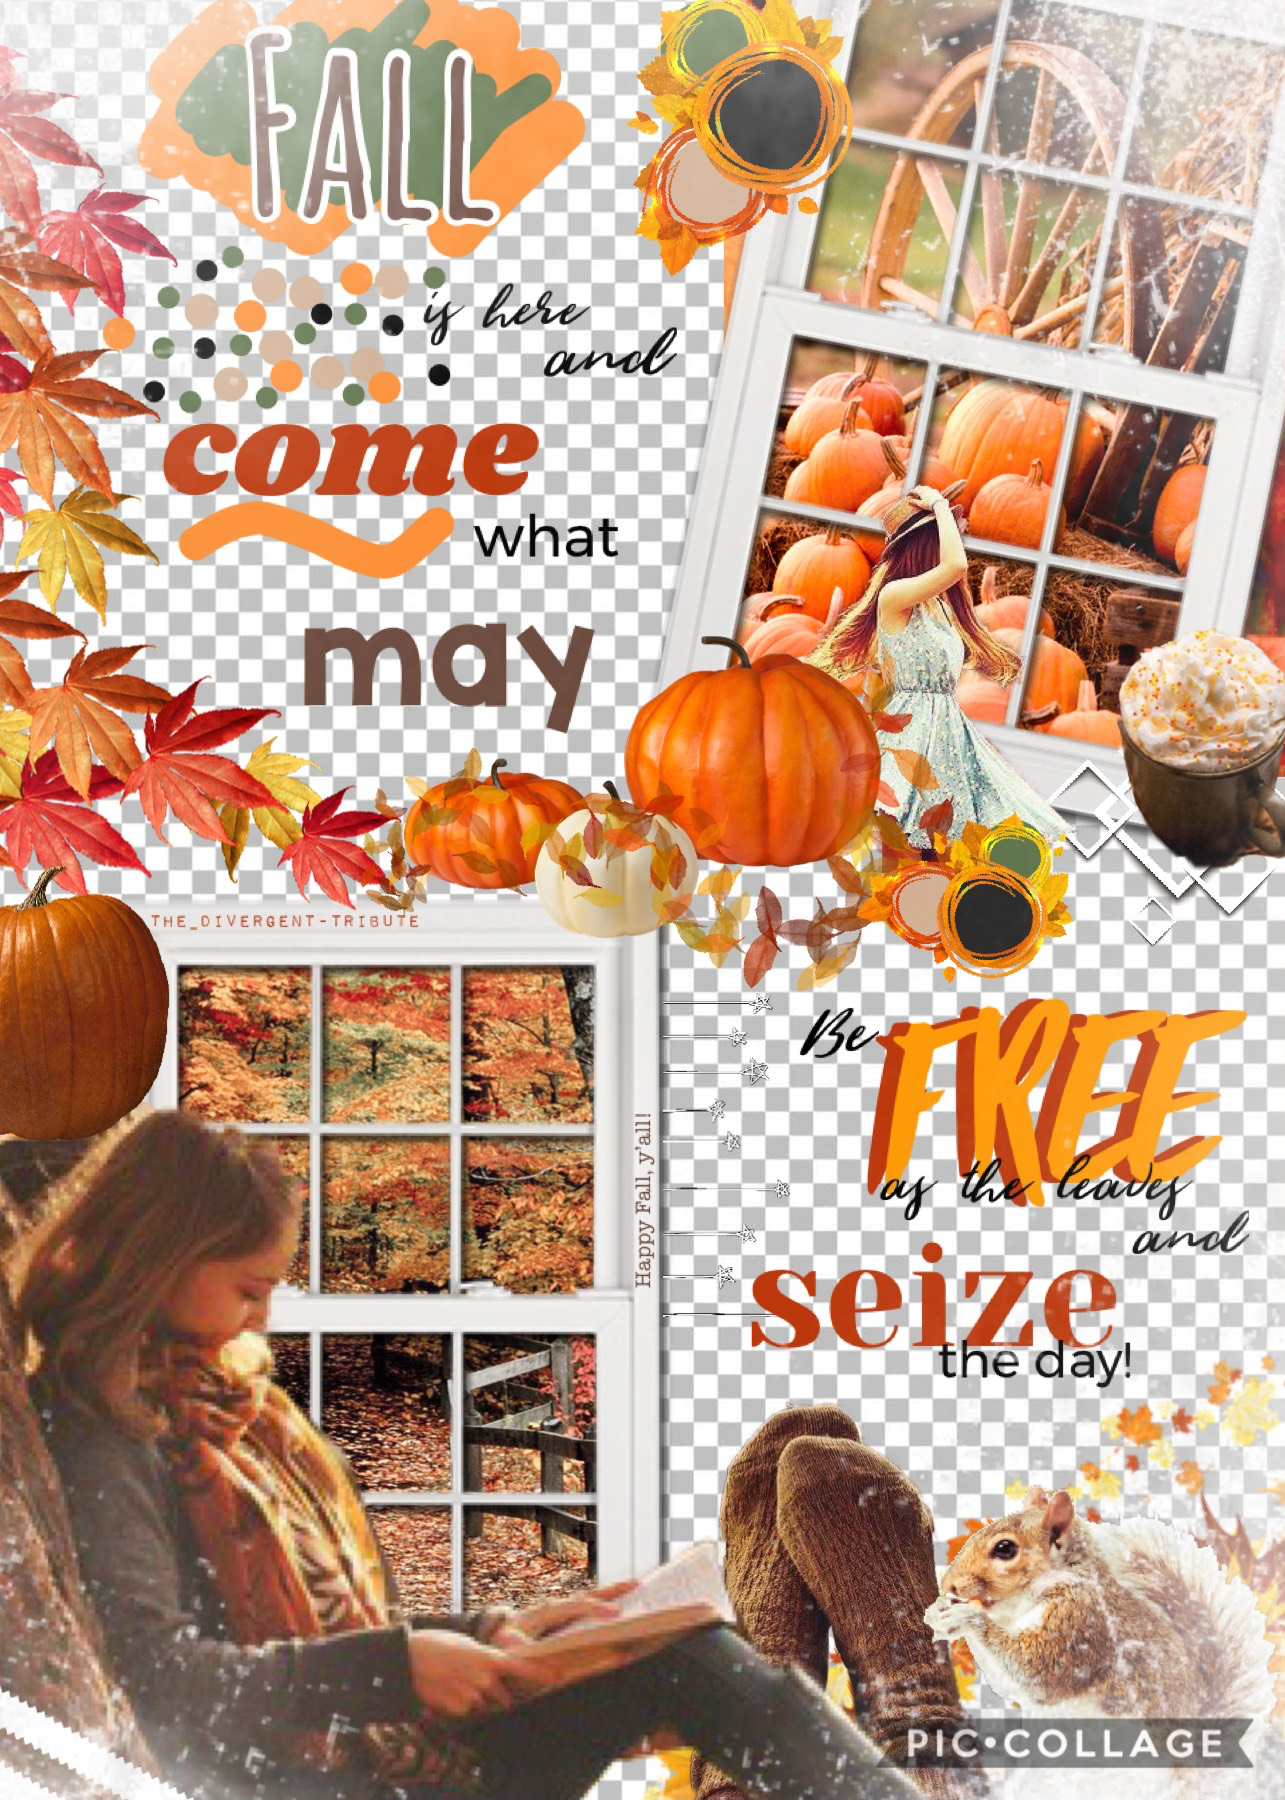 OMG, y’all! It’s FALL! 😂 The quote I used is one I wrote myself! Welcome season of fuzzy socks and long naps! And I LOVE this collage...it may be my best one yet!!
🍁 Happy Fall! 🍁